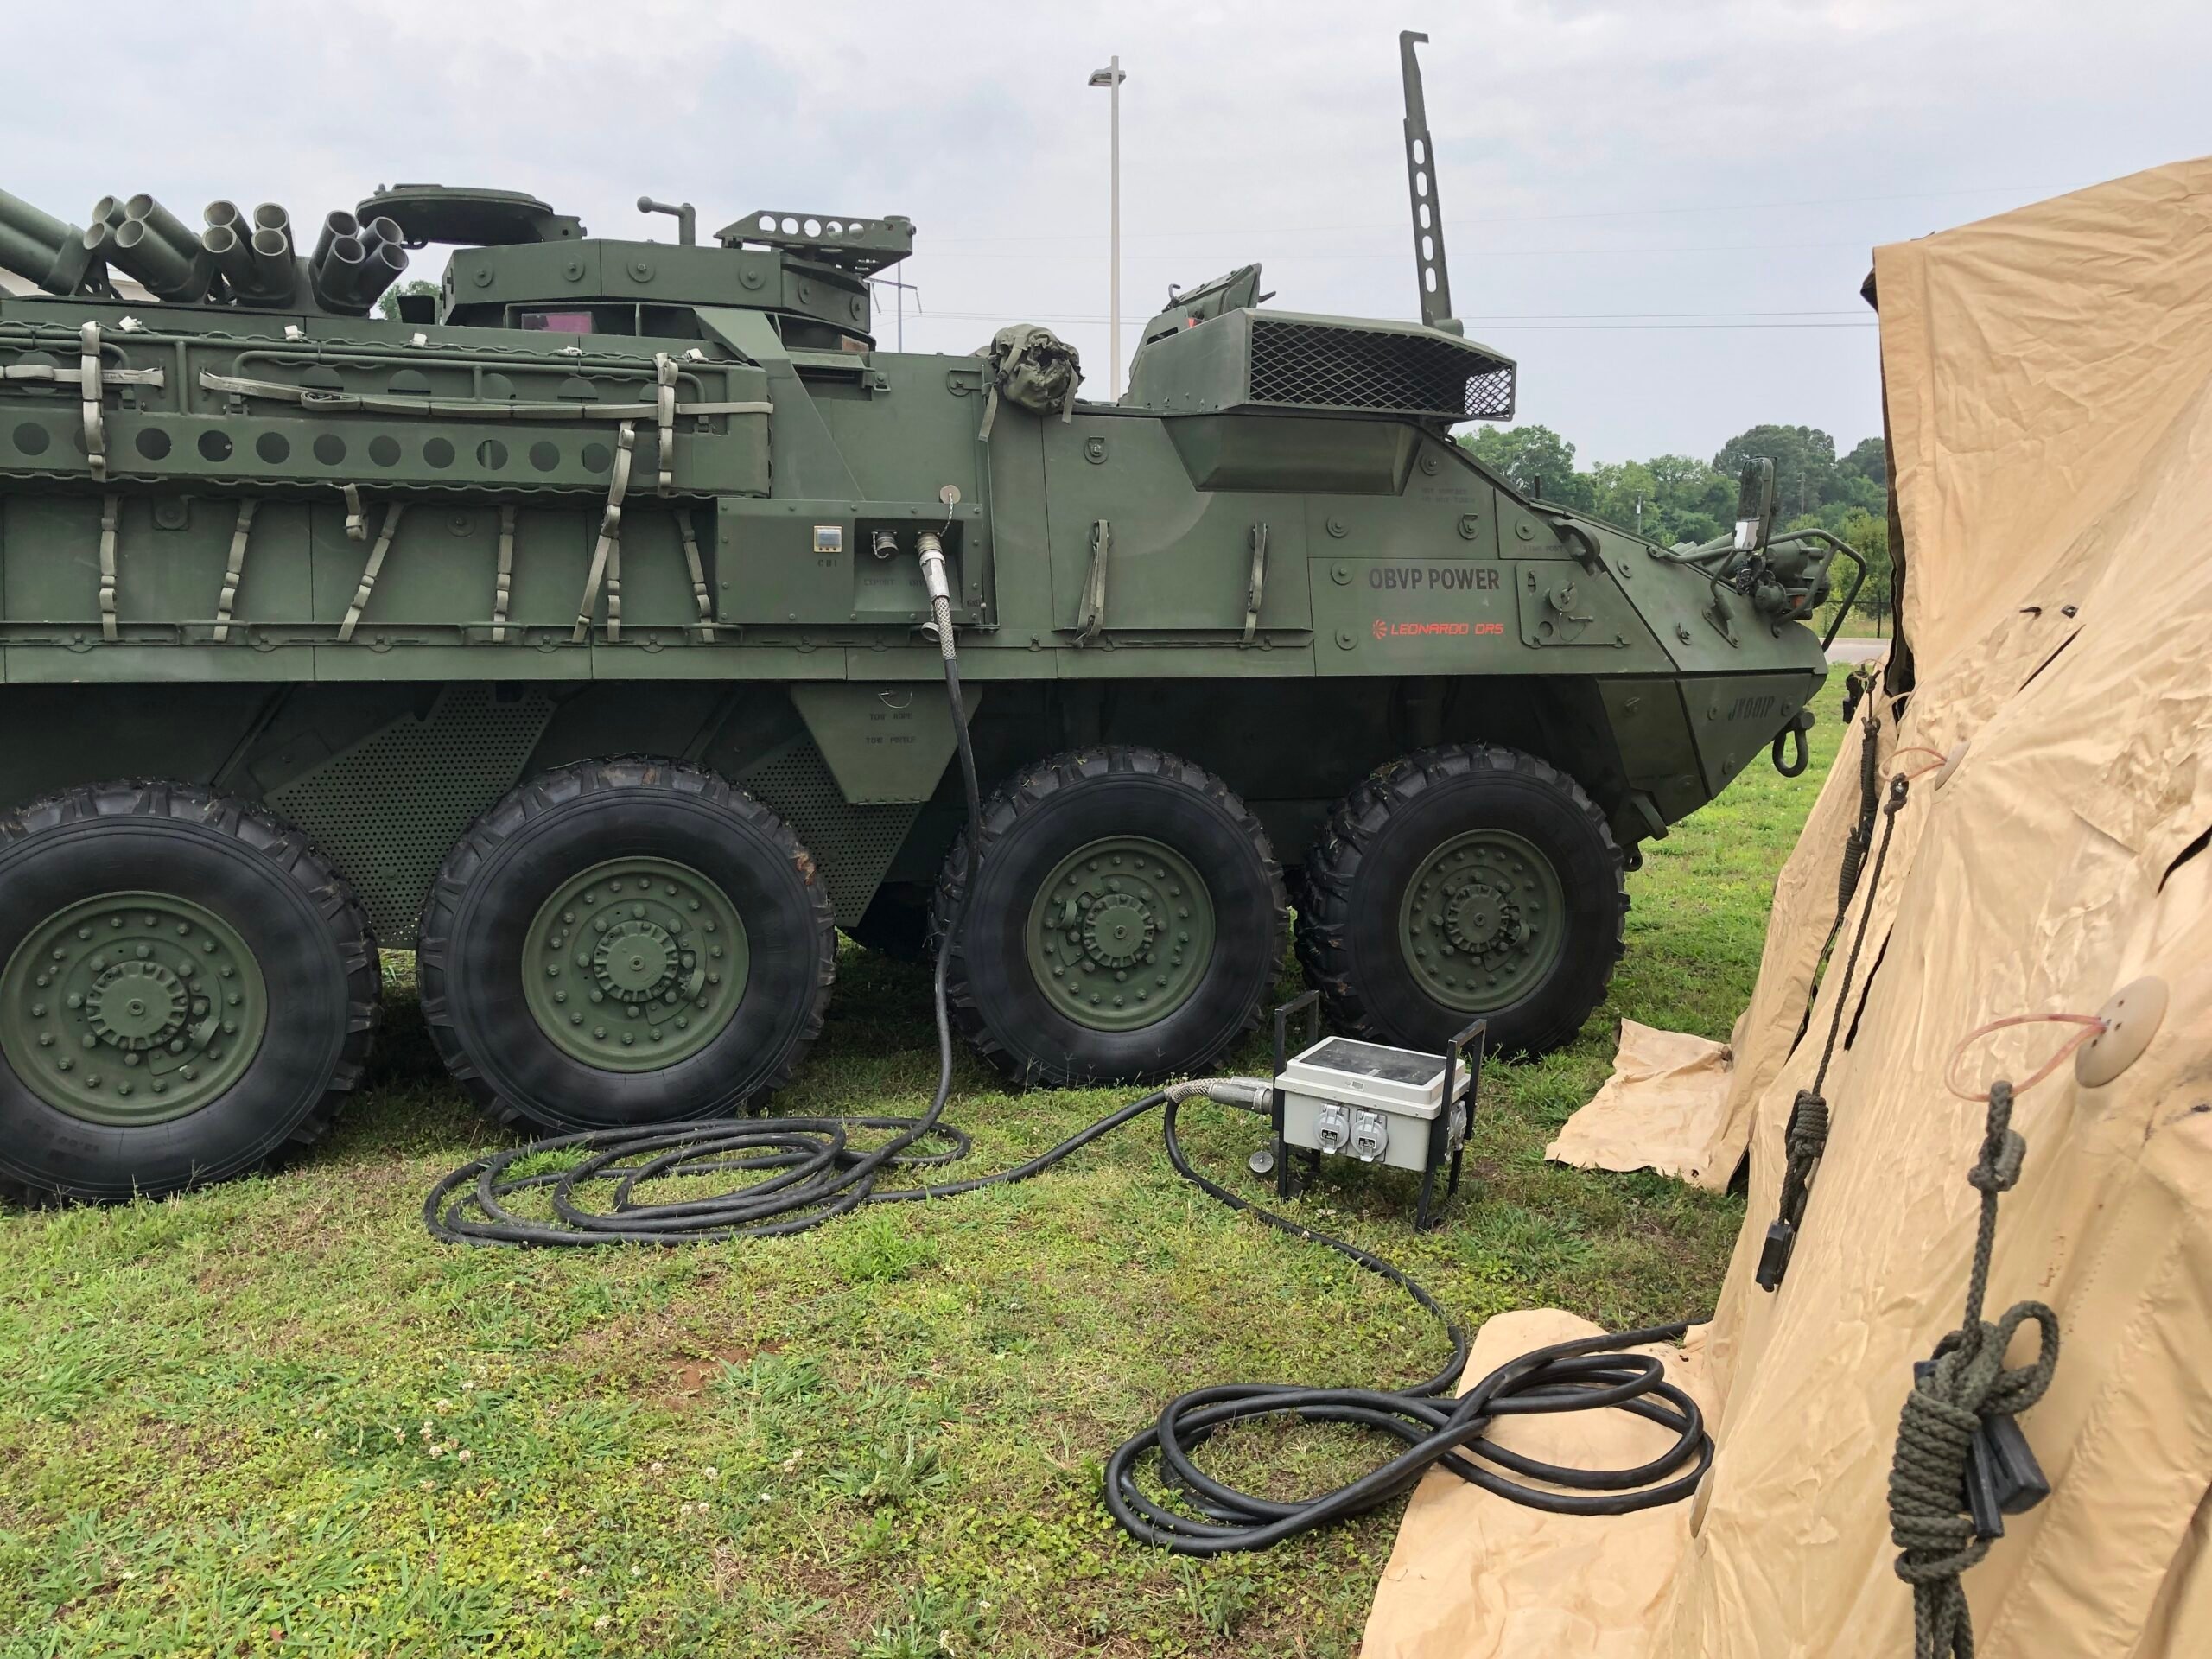 Next-Generation Power for the Next-Generation Combat Vehicles